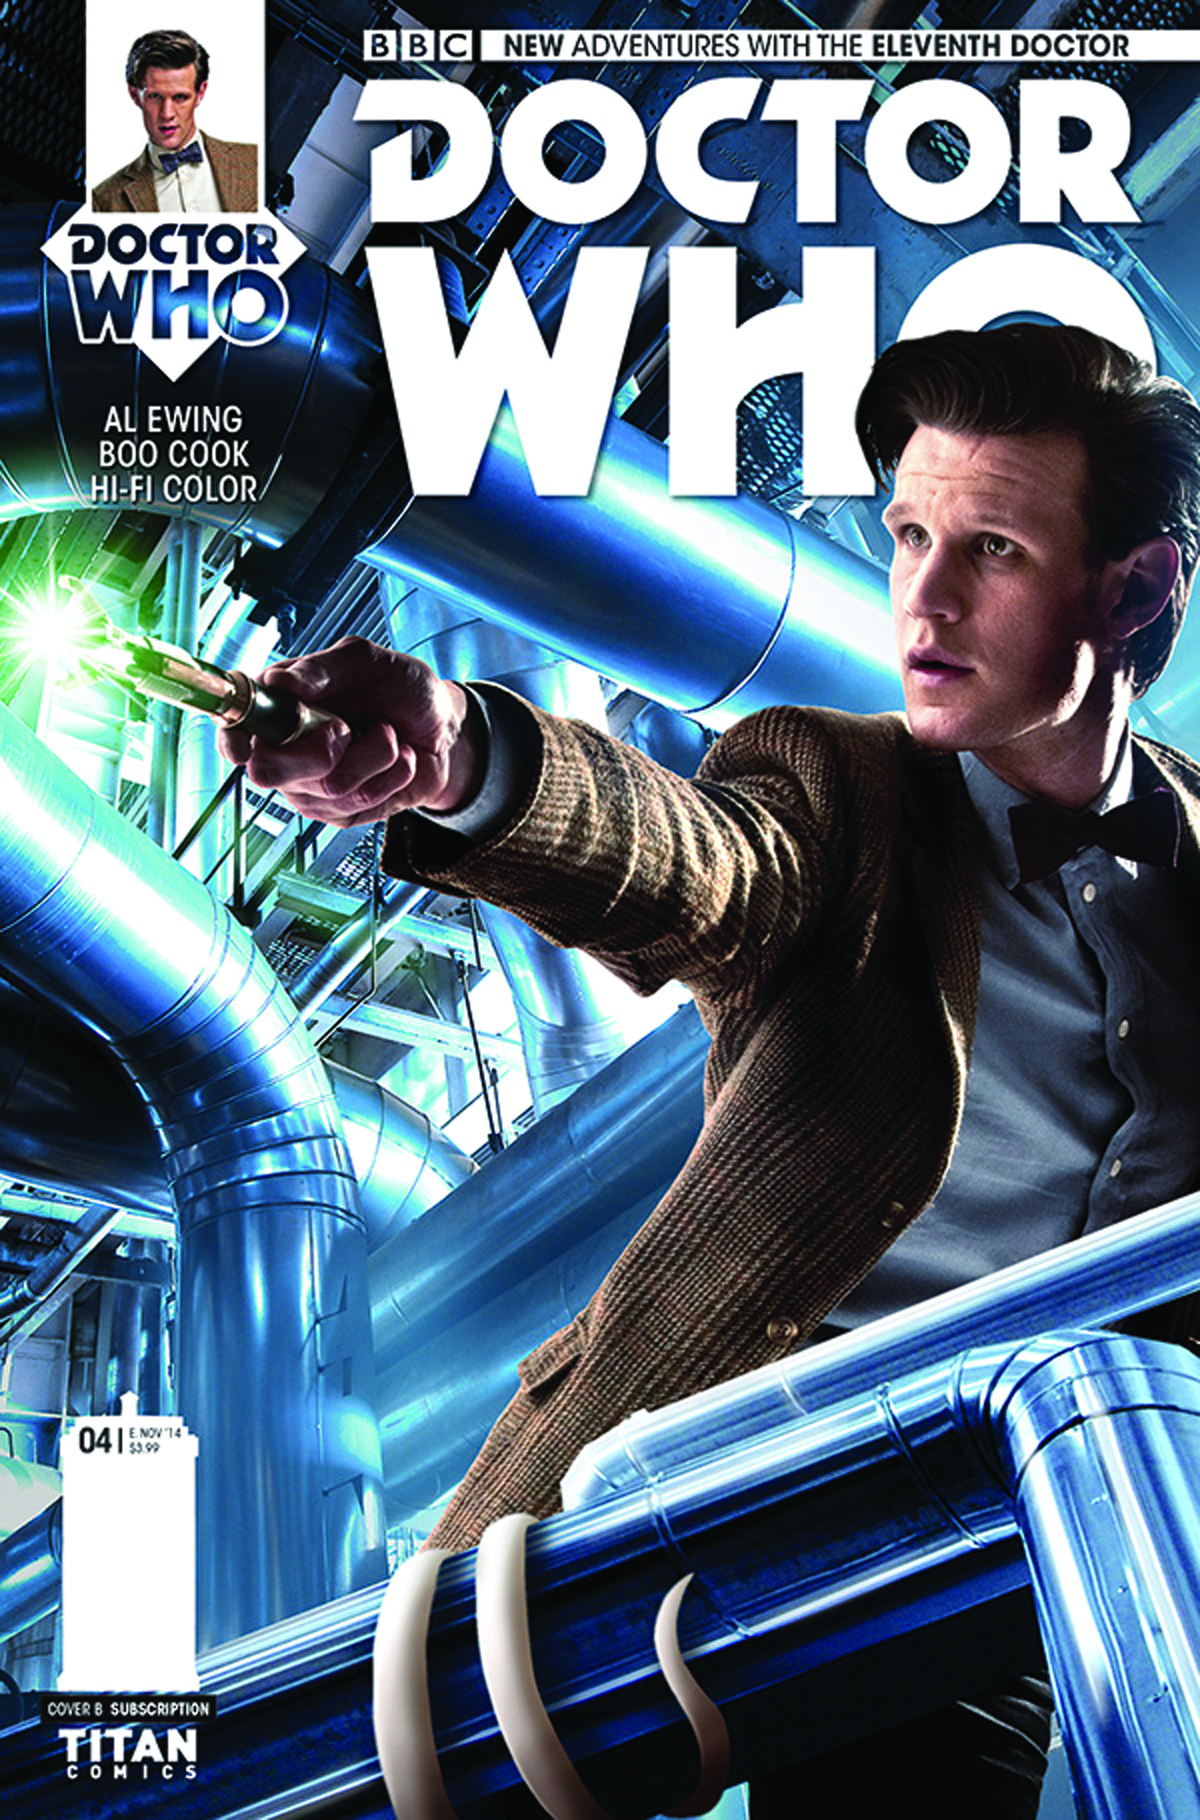 DOCTOR WHO 11TH #4 SUBSCRIPTION PHOTO